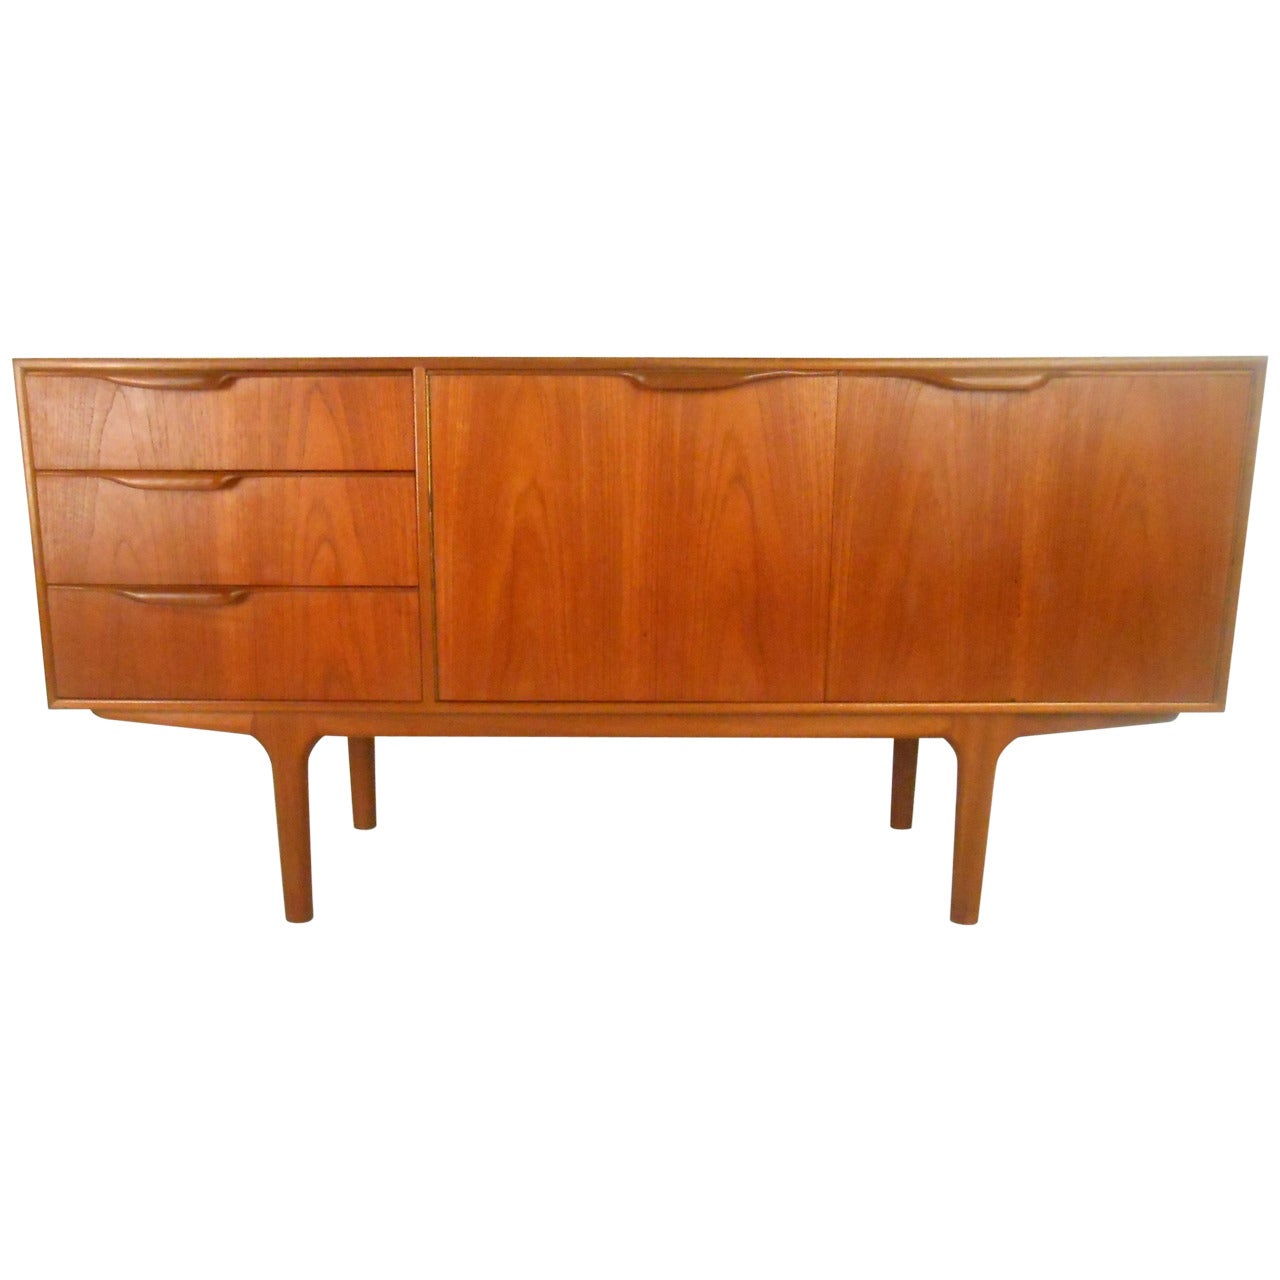 Mid-Century Modern Miniature Sideboard by A.H. MacIntosh & Co